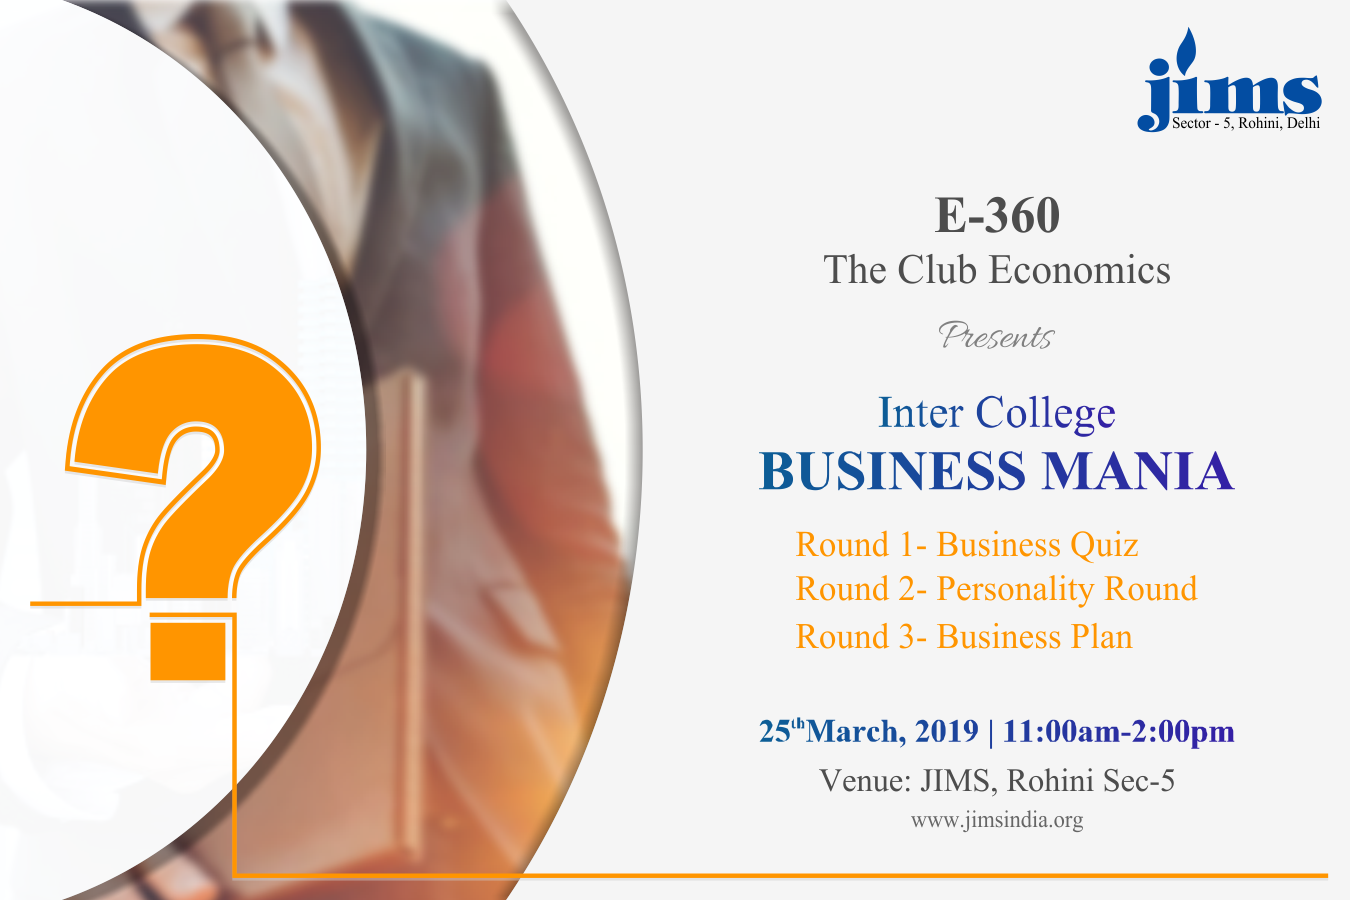 JIMS Rohini Economics Club E-360, is organizing Inter College BUSINESS MANIA on March 25, 2019 from 11:00 am to 02:00 pm